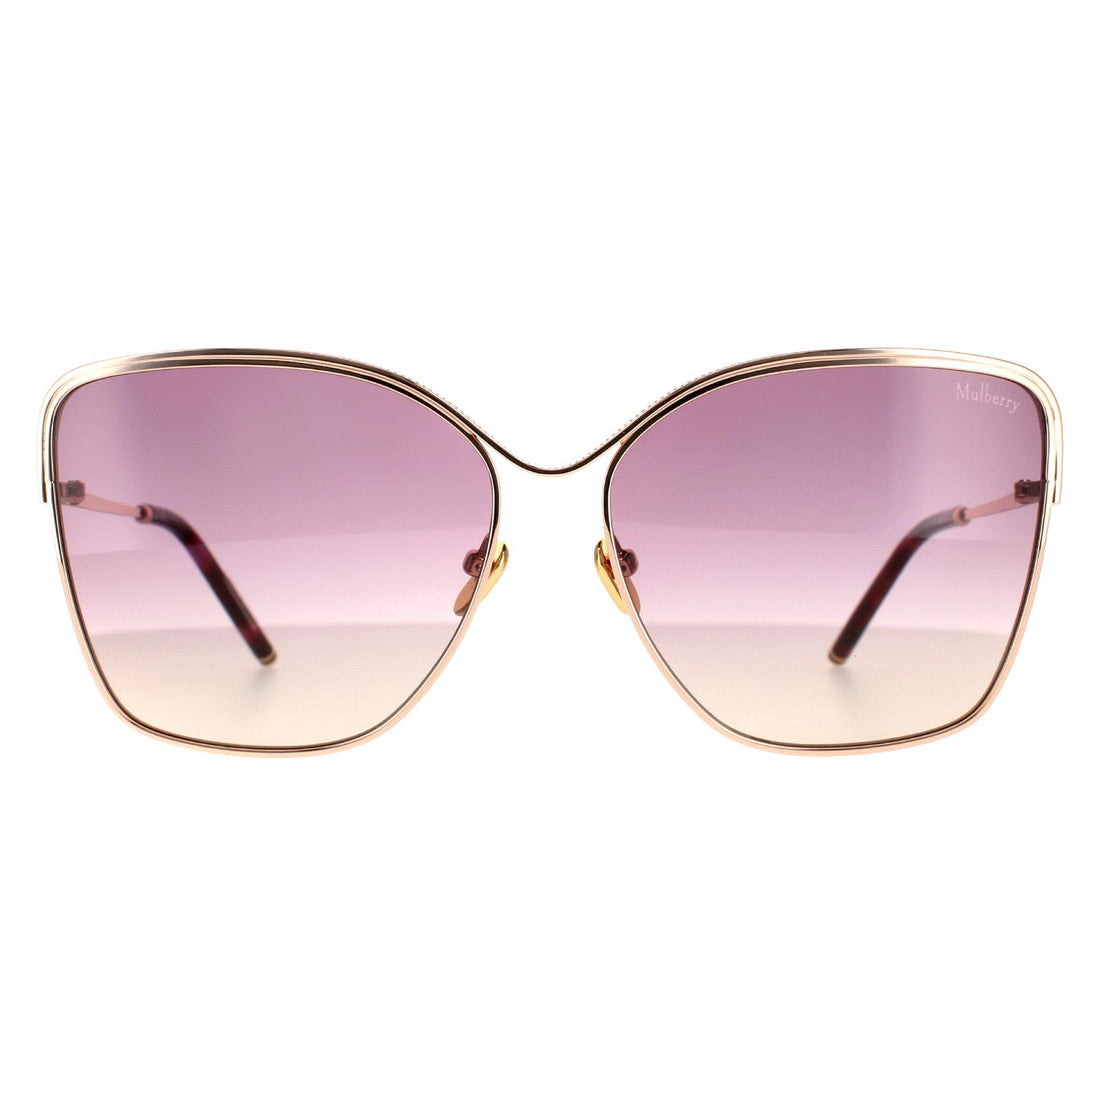 Mulberry SML040 Sunglasses Shiny Copper Gold Violet Yellow Gradient